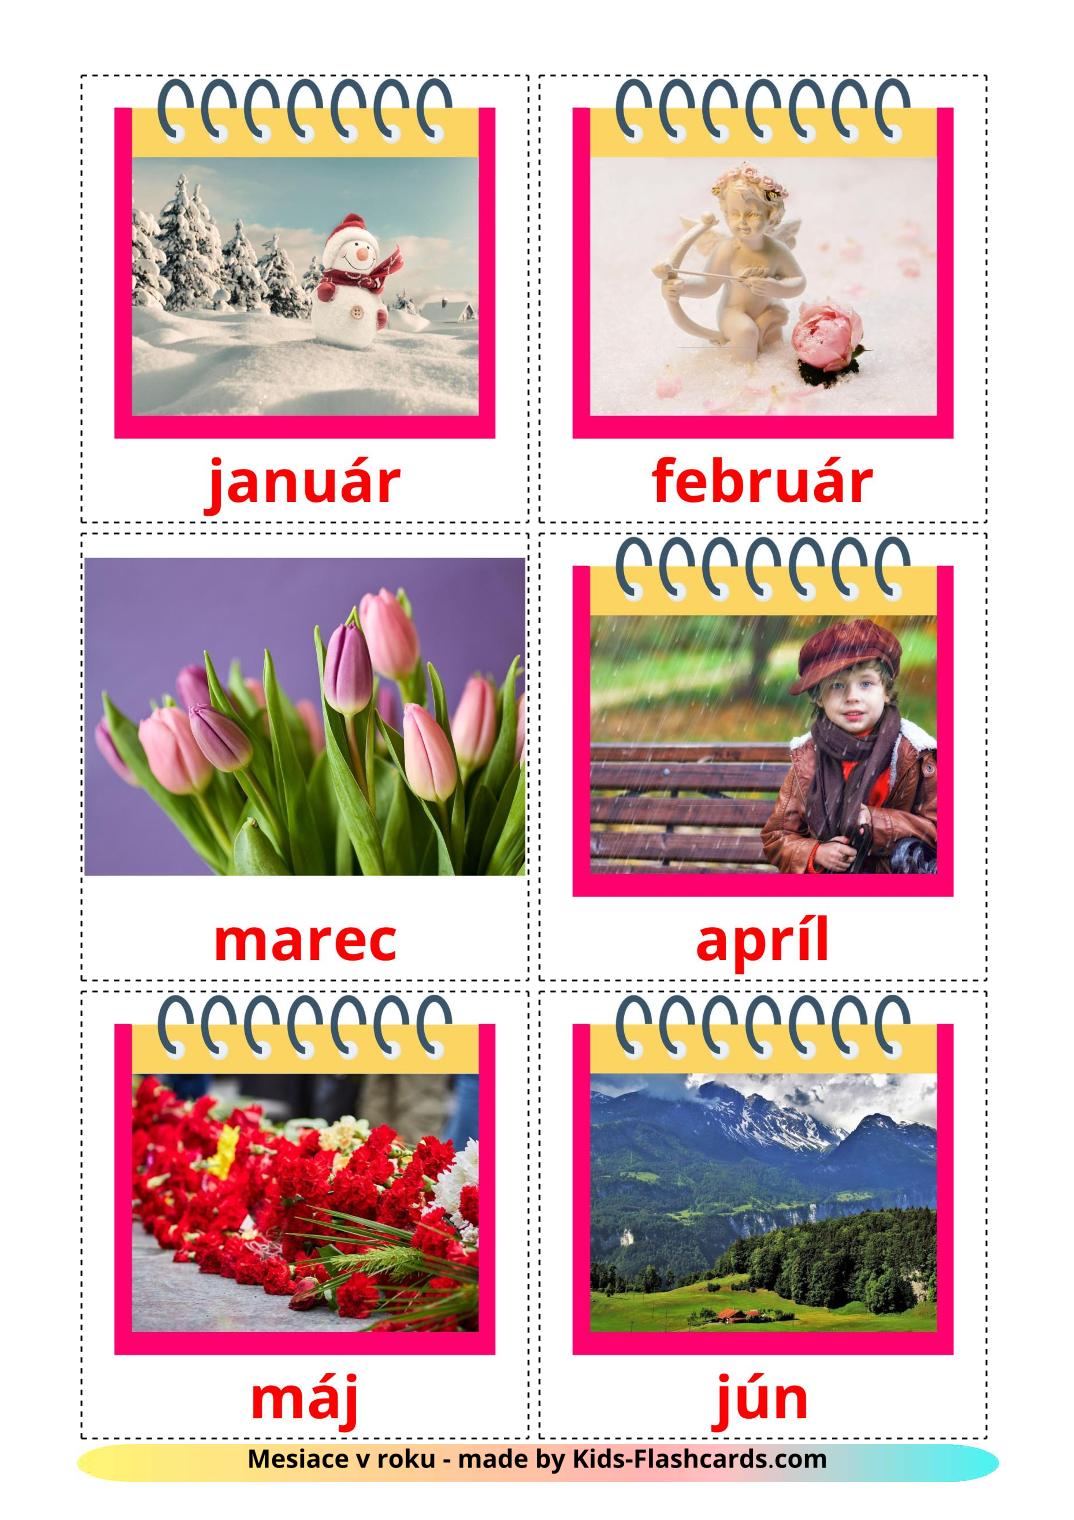 Months of the Year - 12 Free Printable slovak Flashcards 